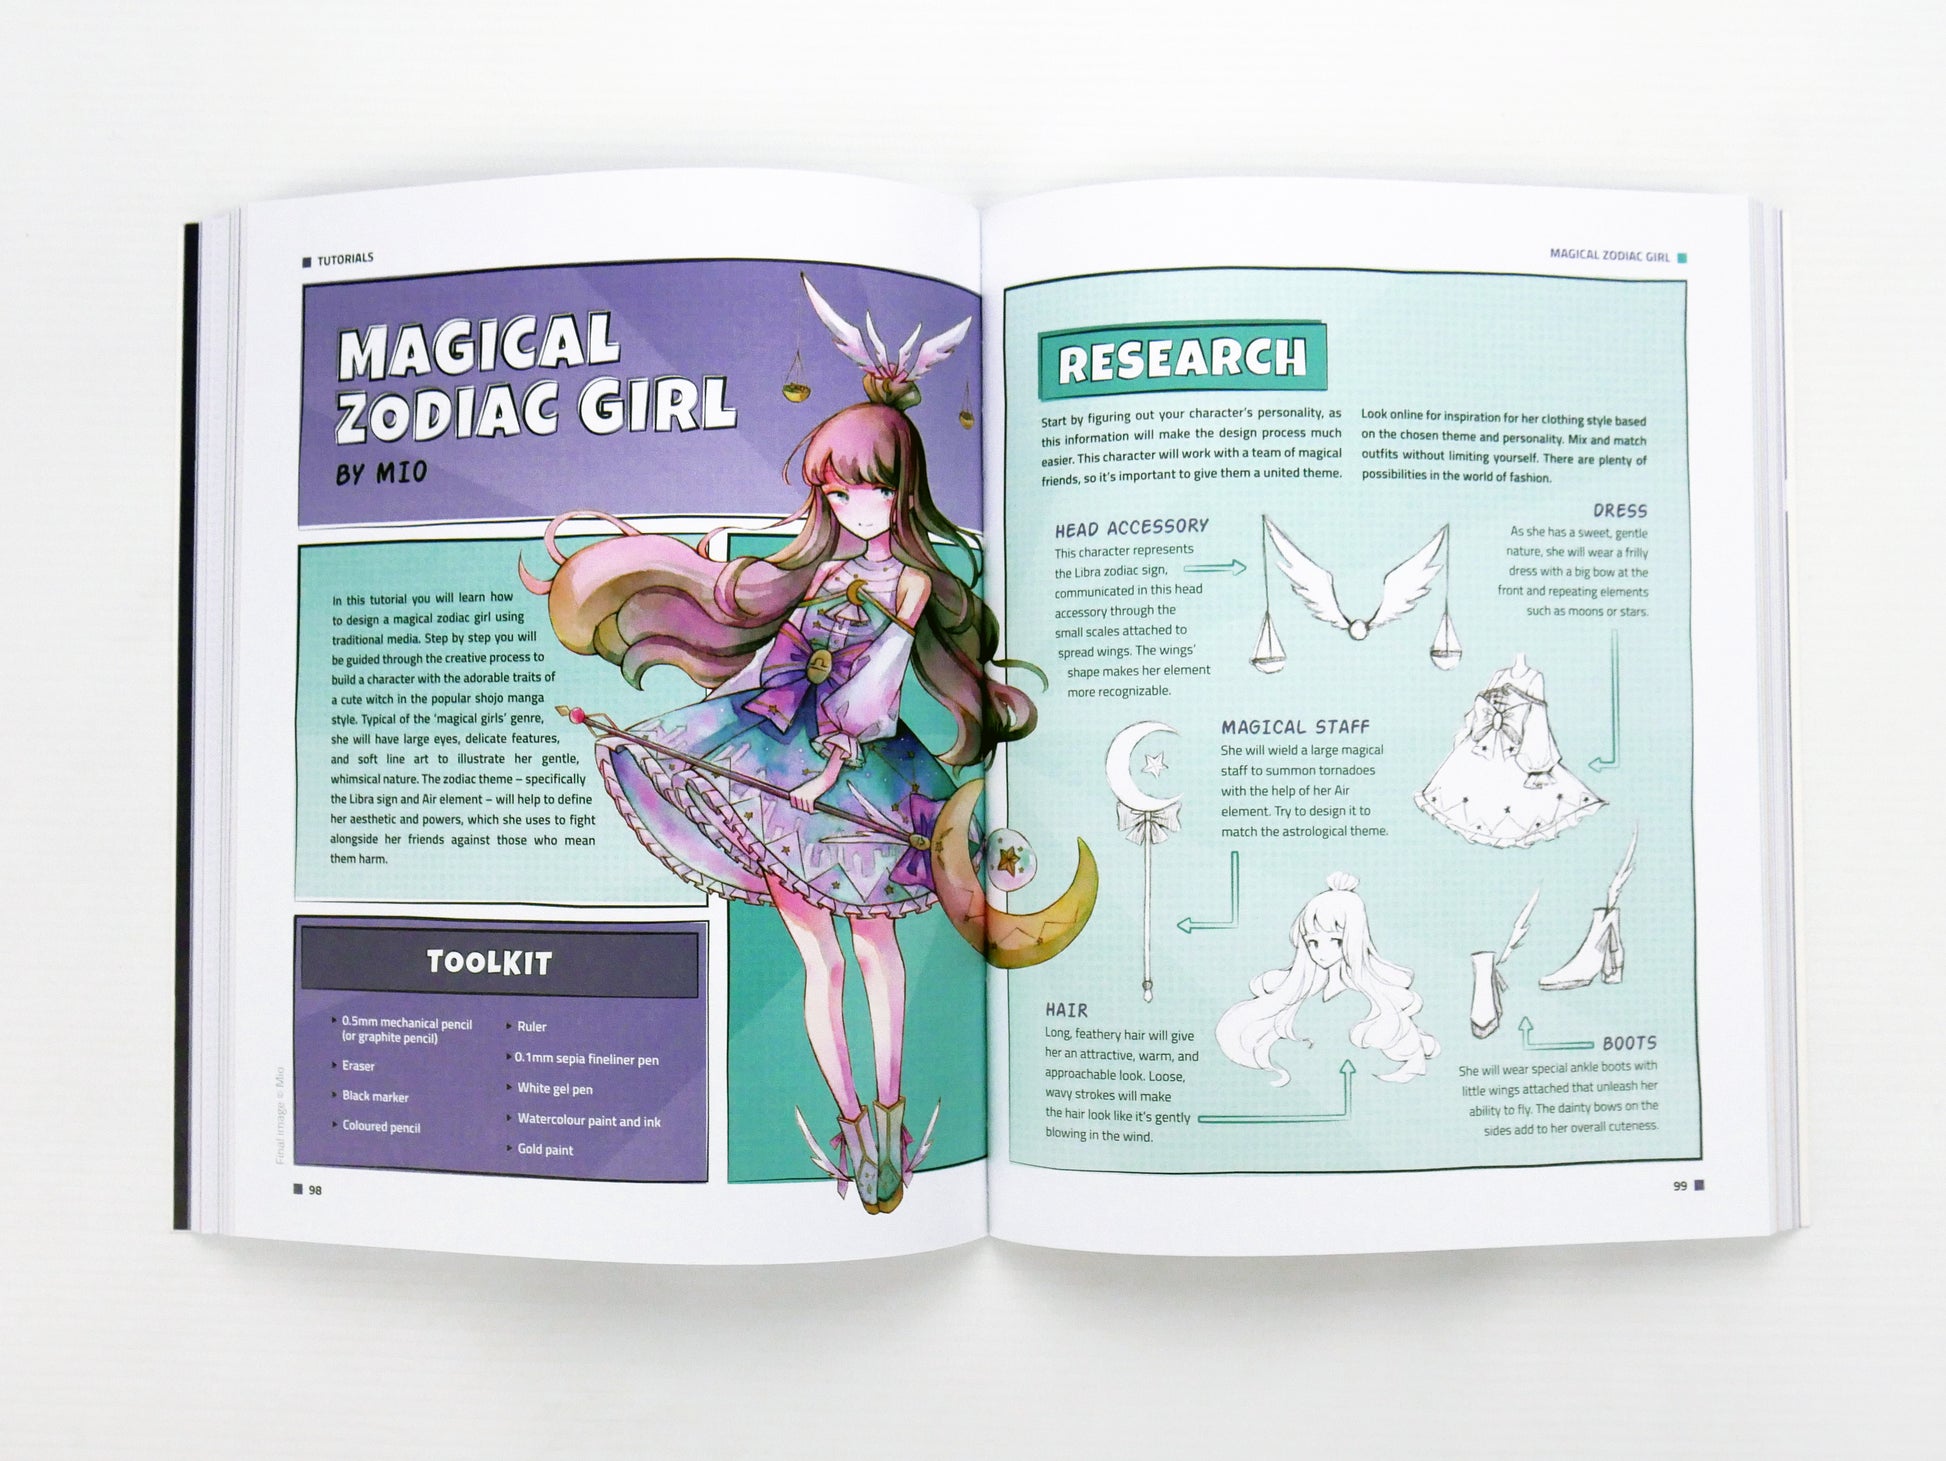 Anime Sketchbook, Just a Girl Who Loves Anime and Sketching: Manga Anime  Drawing Book for Girls